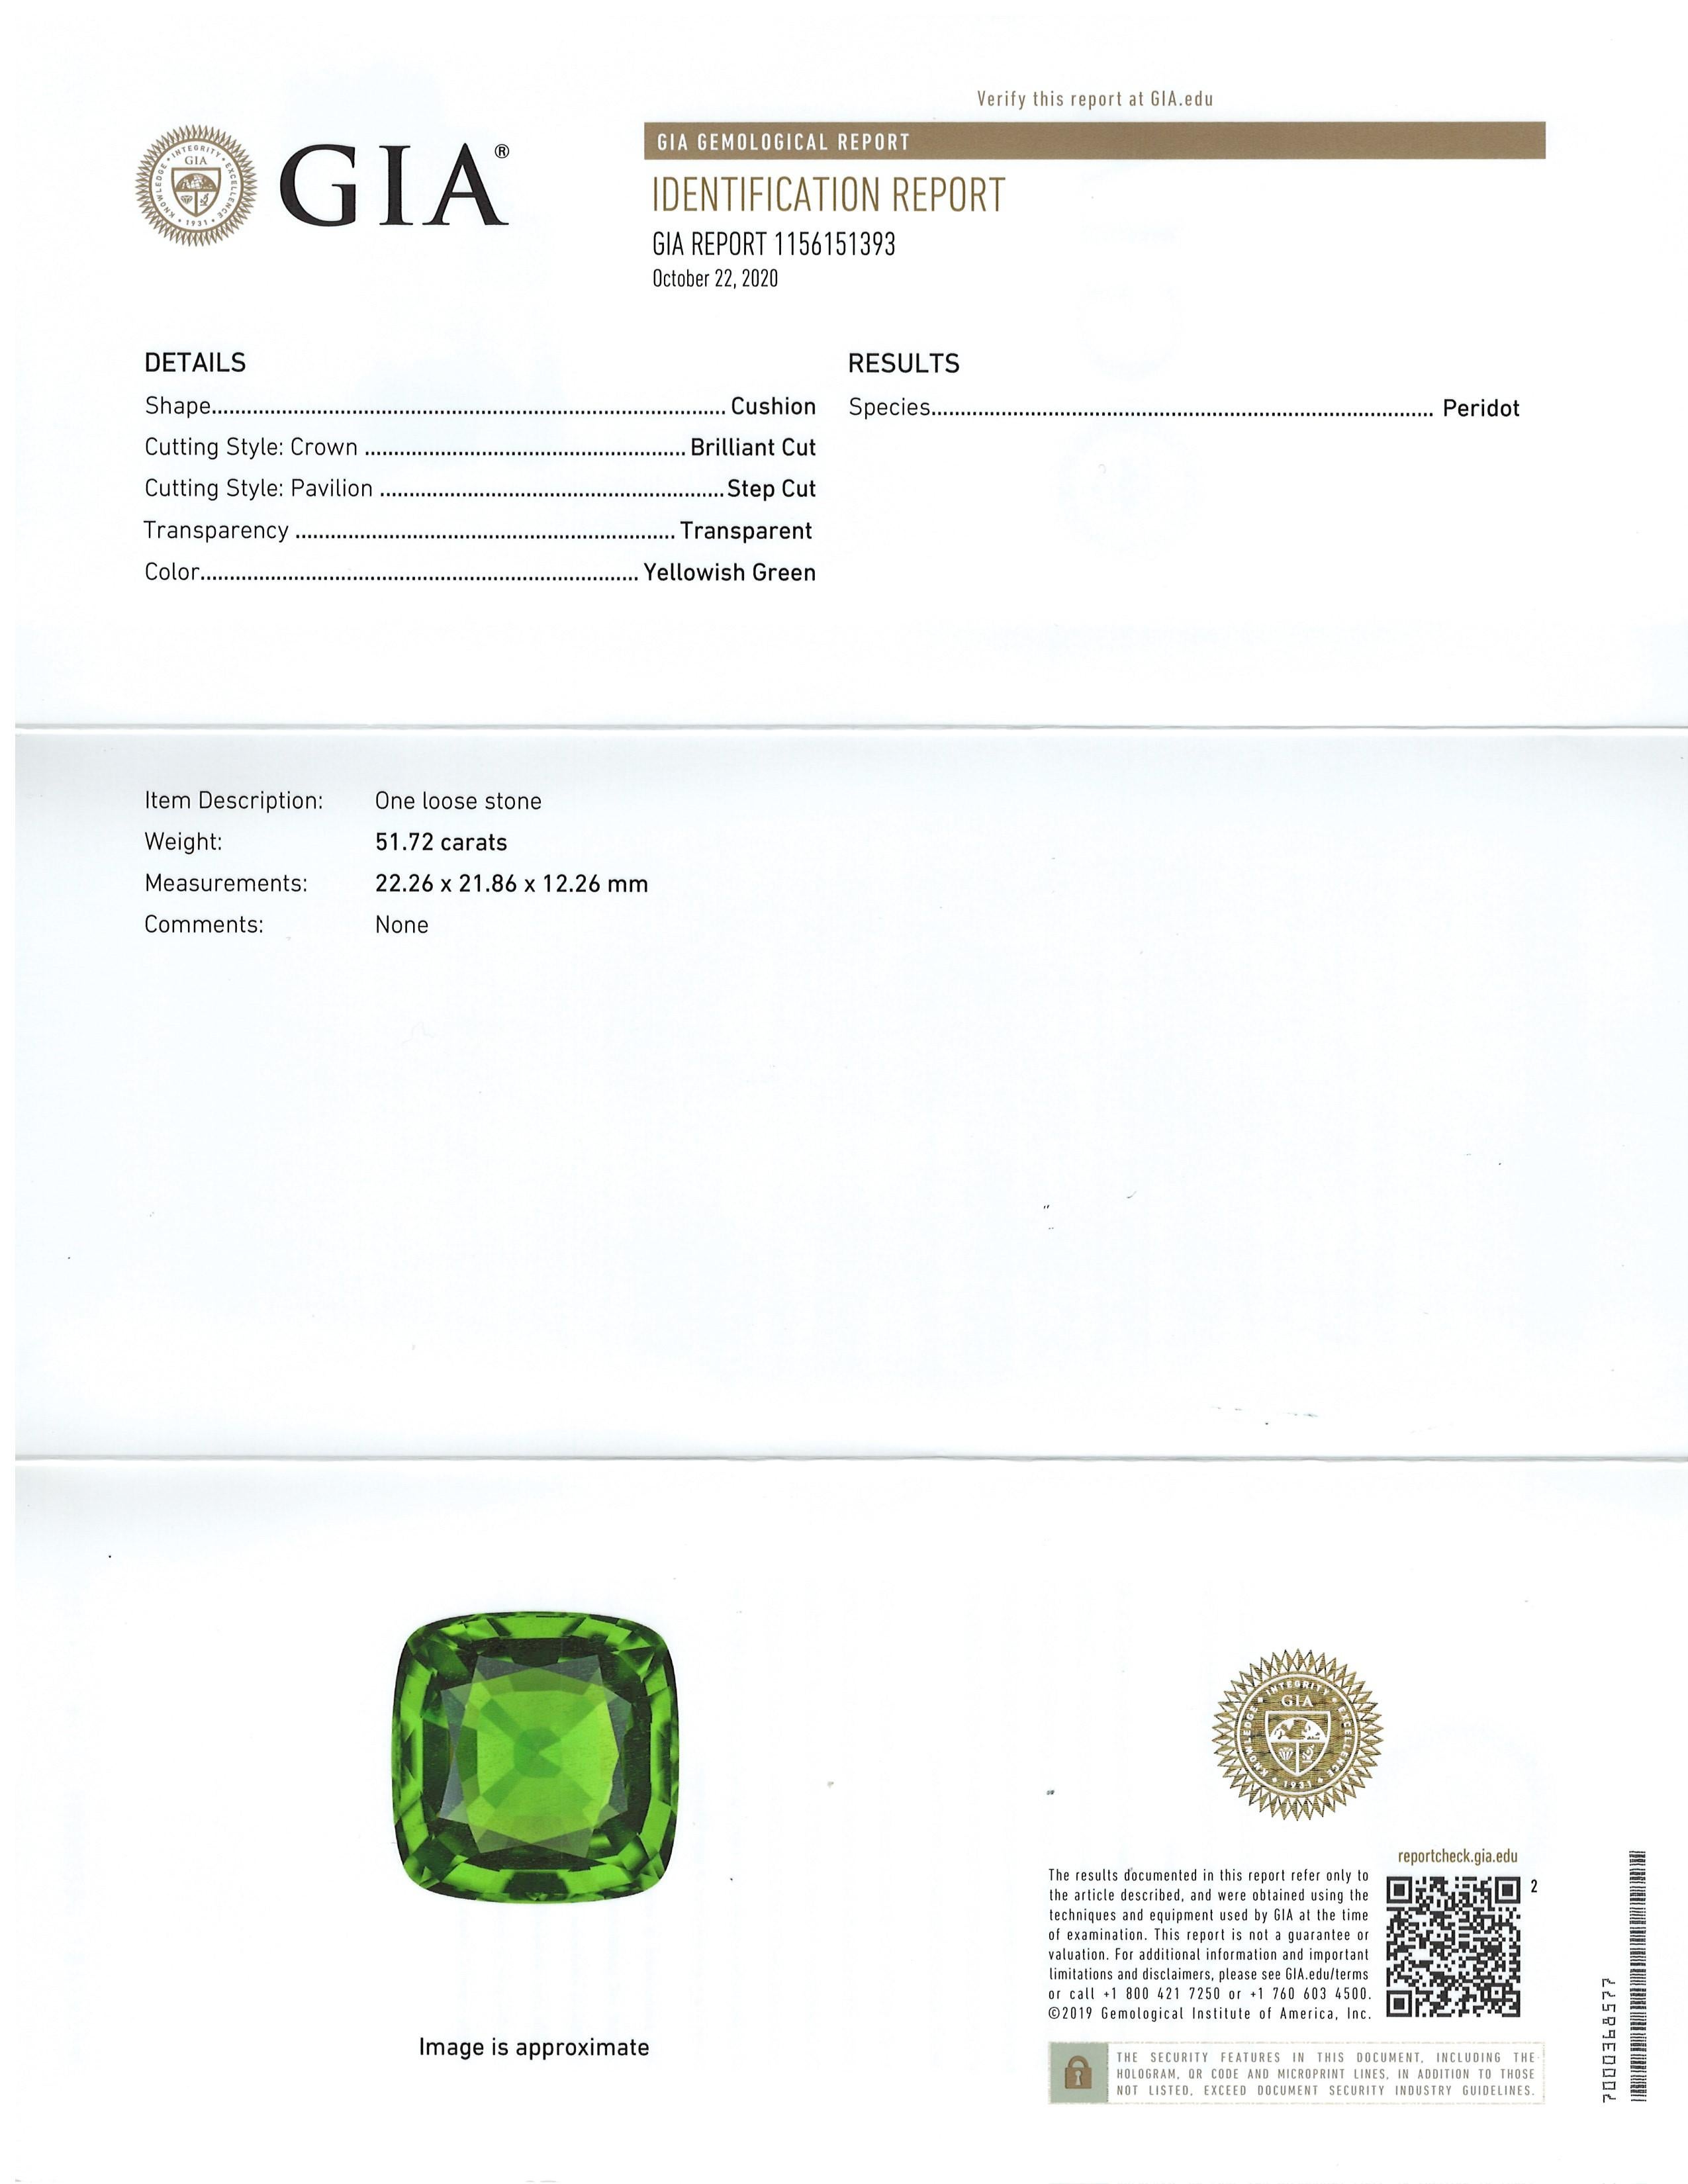 This stunning 51.72 carat cushion-cut peridot displays a highly saturated, intense �“summer grass color” and measures 22.26 x 21.86 x 12.26 millimeters. Fine peridots over 10 carats with such vivid color and superior clarity are extremely rare.